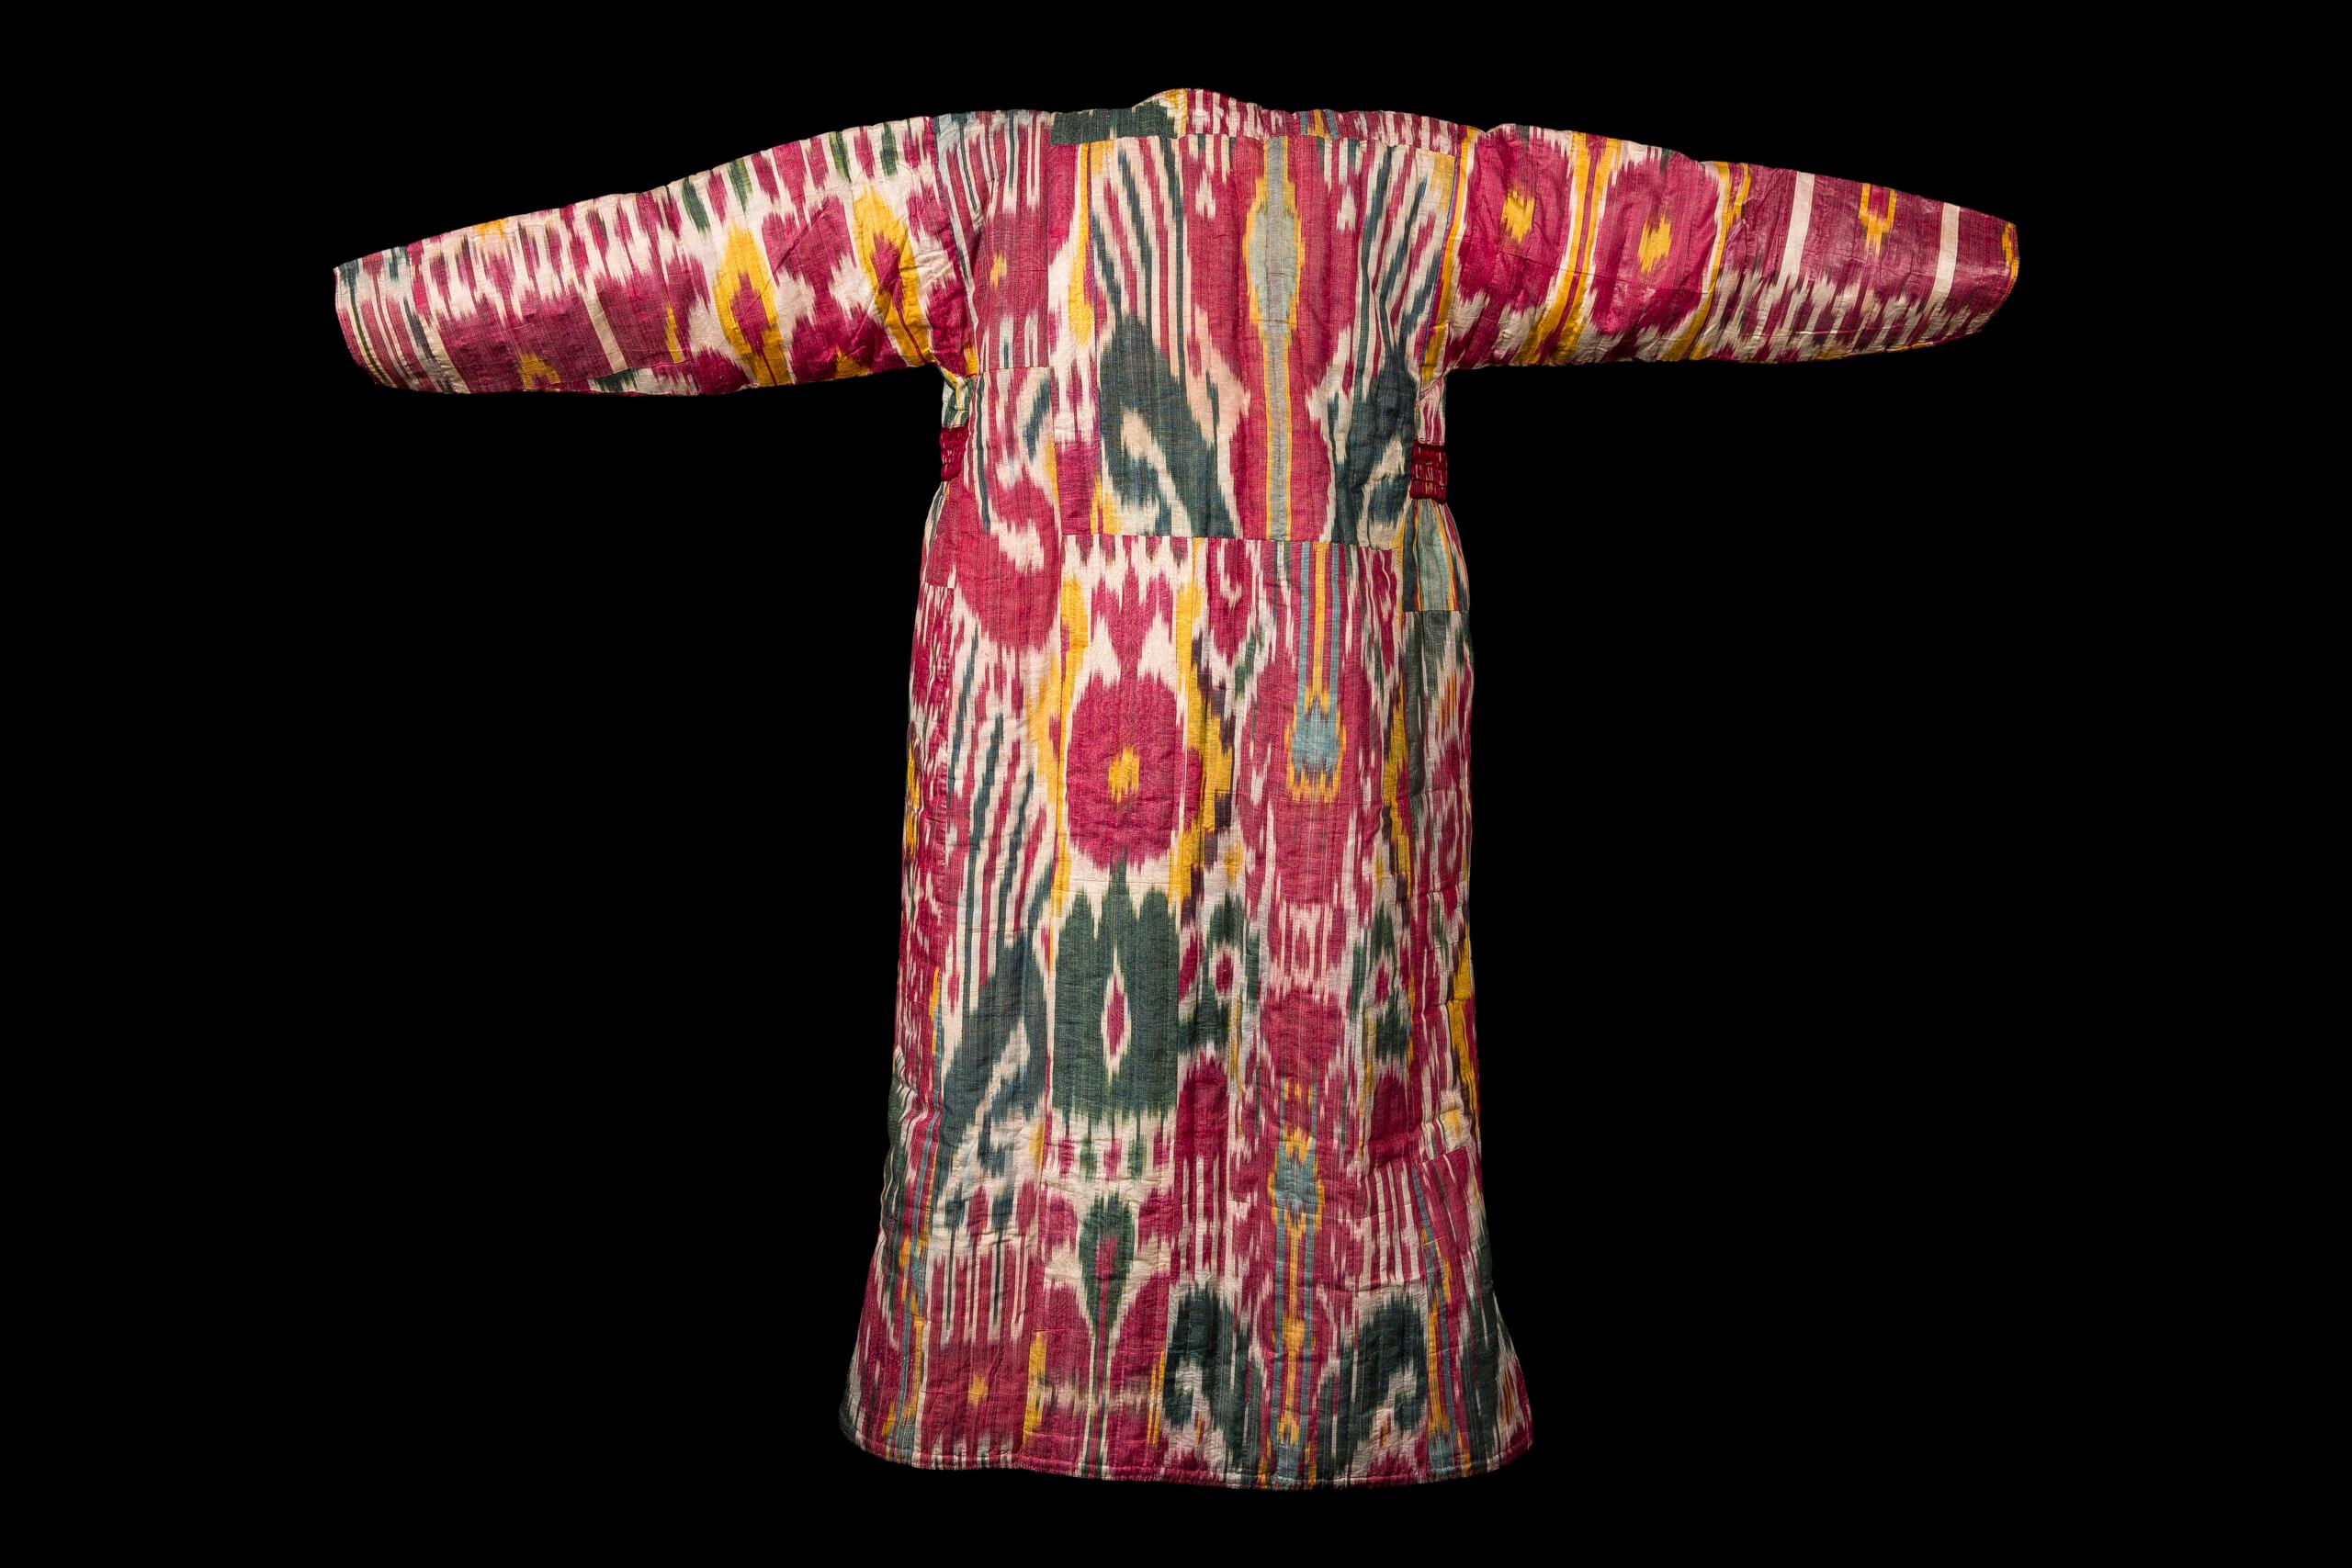 Ikat Chapan – a man’s uzbek coat – Style Robe with exceptionally rich colour and dynamic pattering. Viewers may become lost in this ikat’s intertwining motifs, but it is colour that truly entrances them. Each unique ikat is the work of an individual